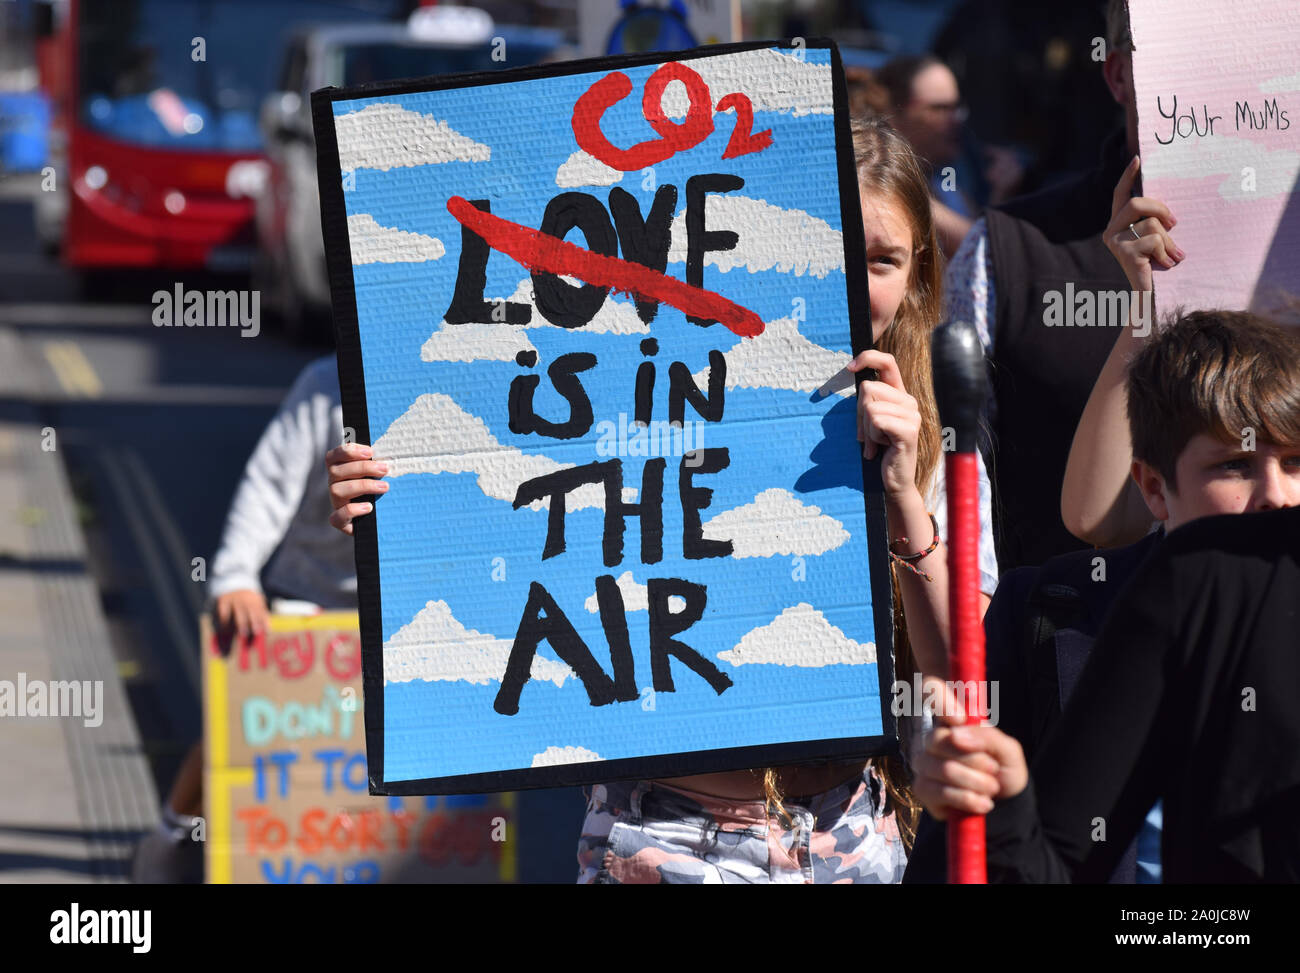 Young girl protesting against climat change in the UK holding a banner that reads 'CO2 is in the air' with the word 'love' crossed through Stock Photo